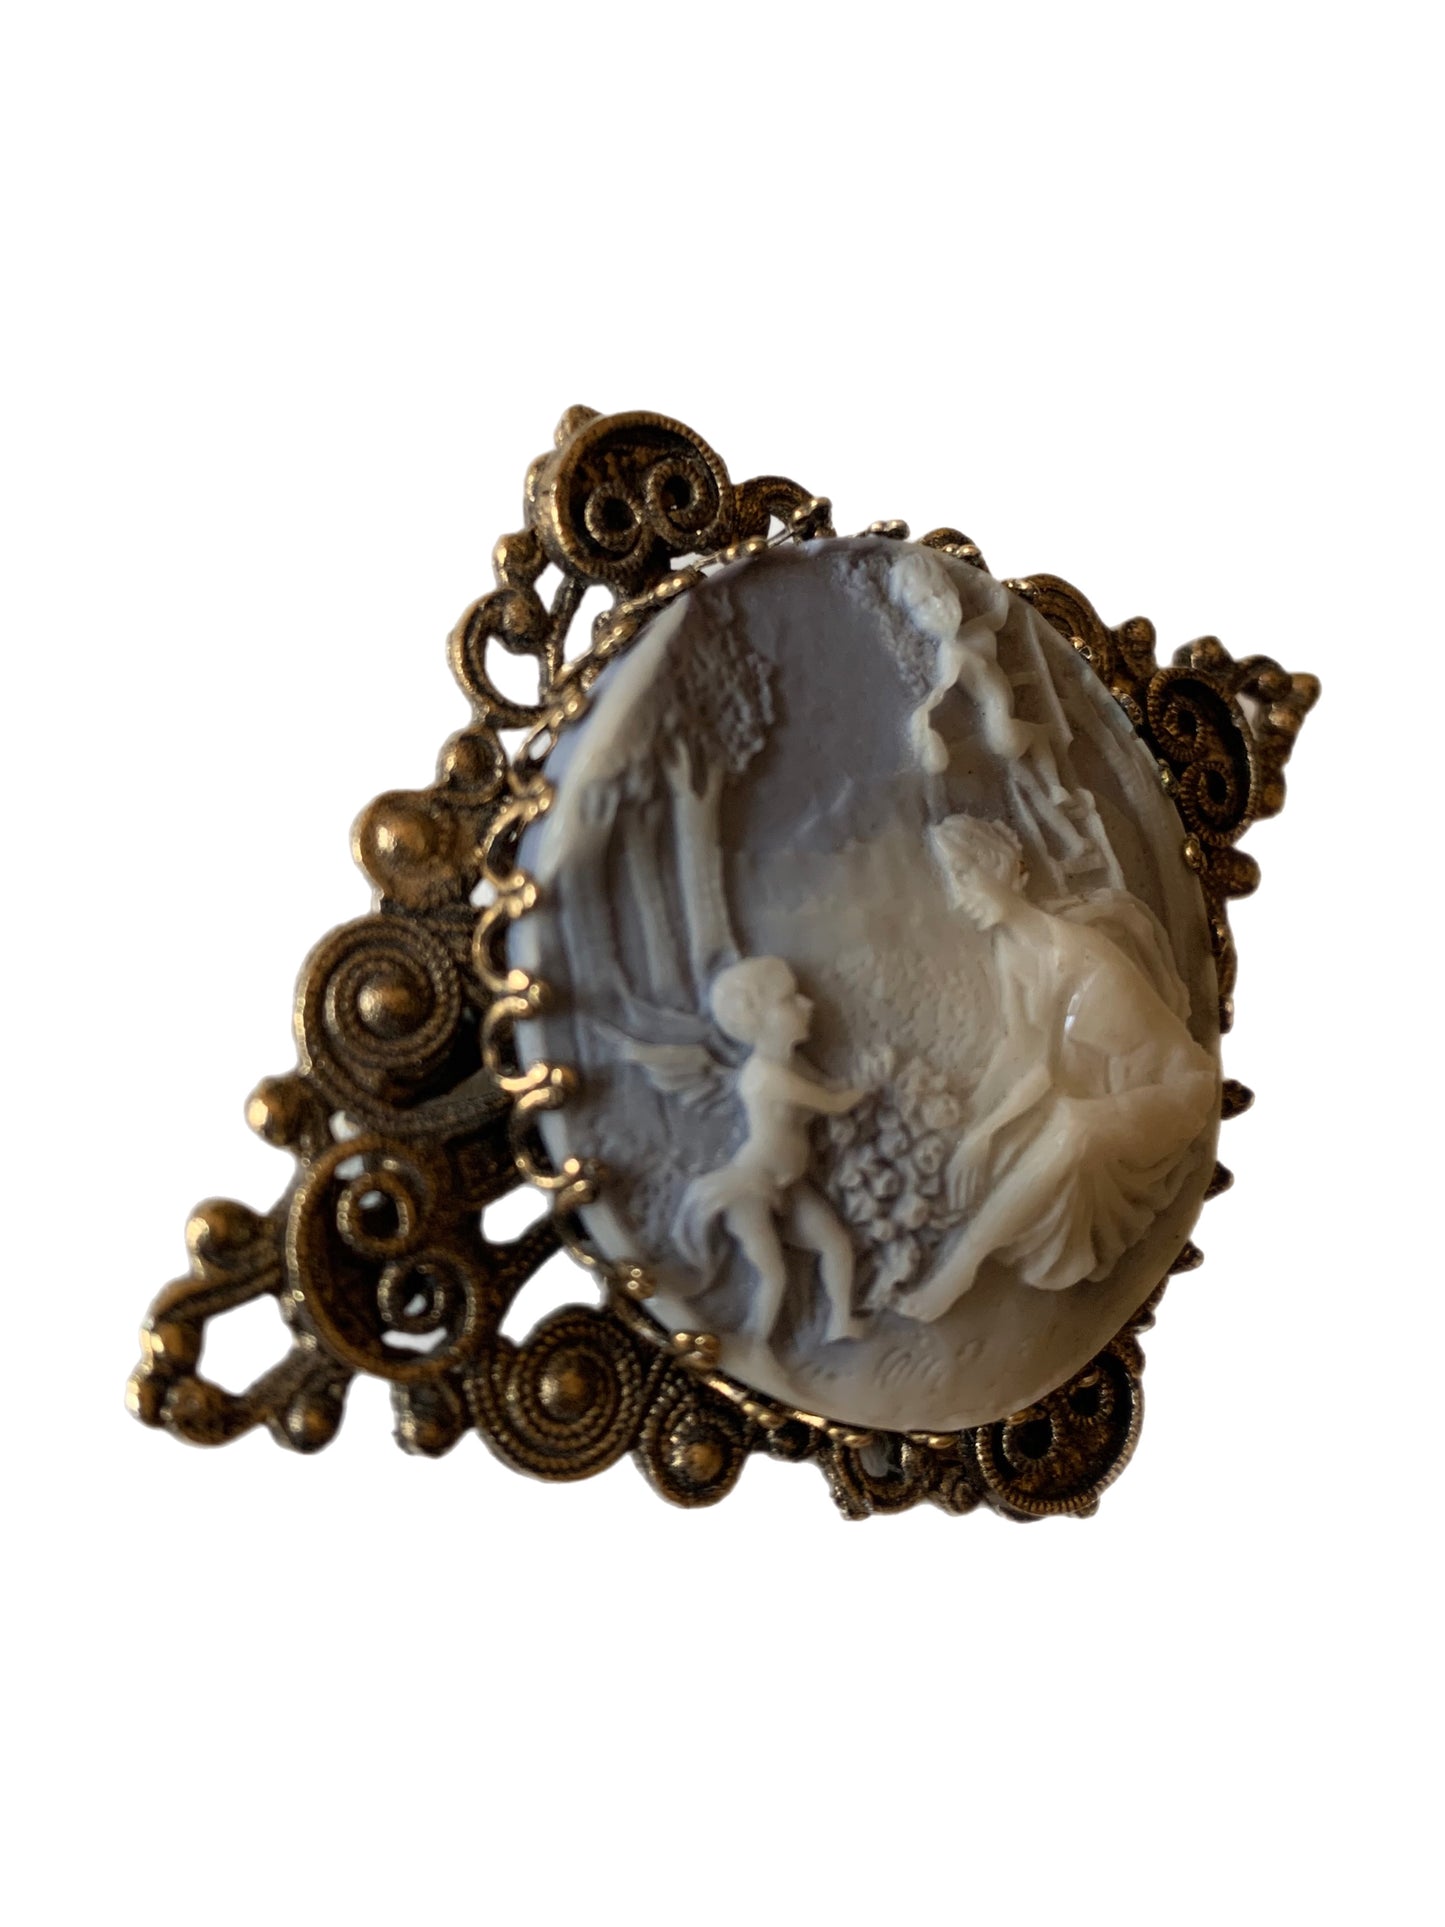 Lady and Cherubs Carved Resin Brooch circa 1960s